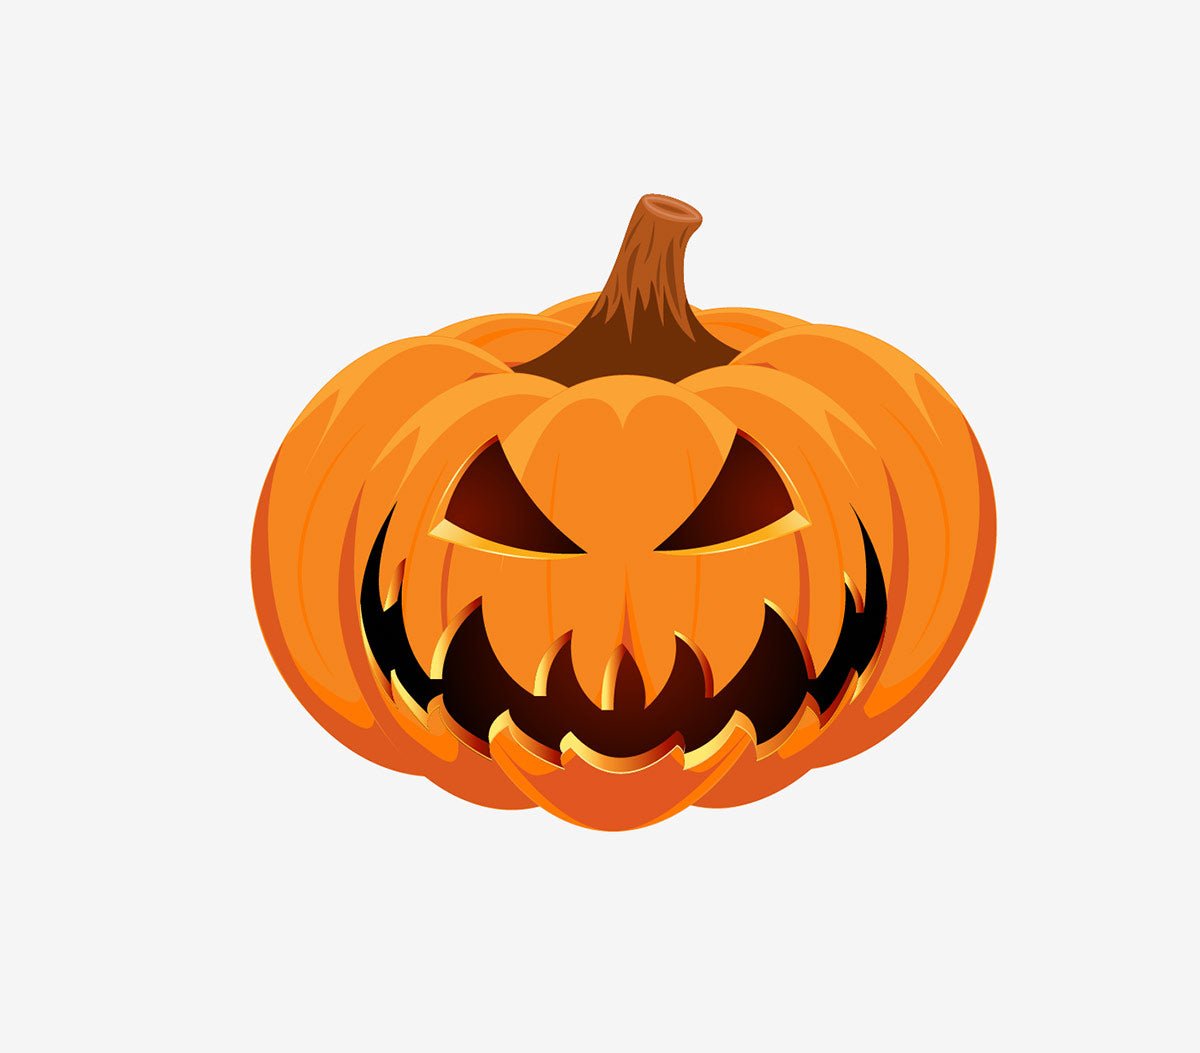 A carved pumpkin, transformed into a menacing Jack O' Lantern with Cover-Alls pumpkin decals, featuring sharp teeth and triangular eyes, displayed on a plain white background.